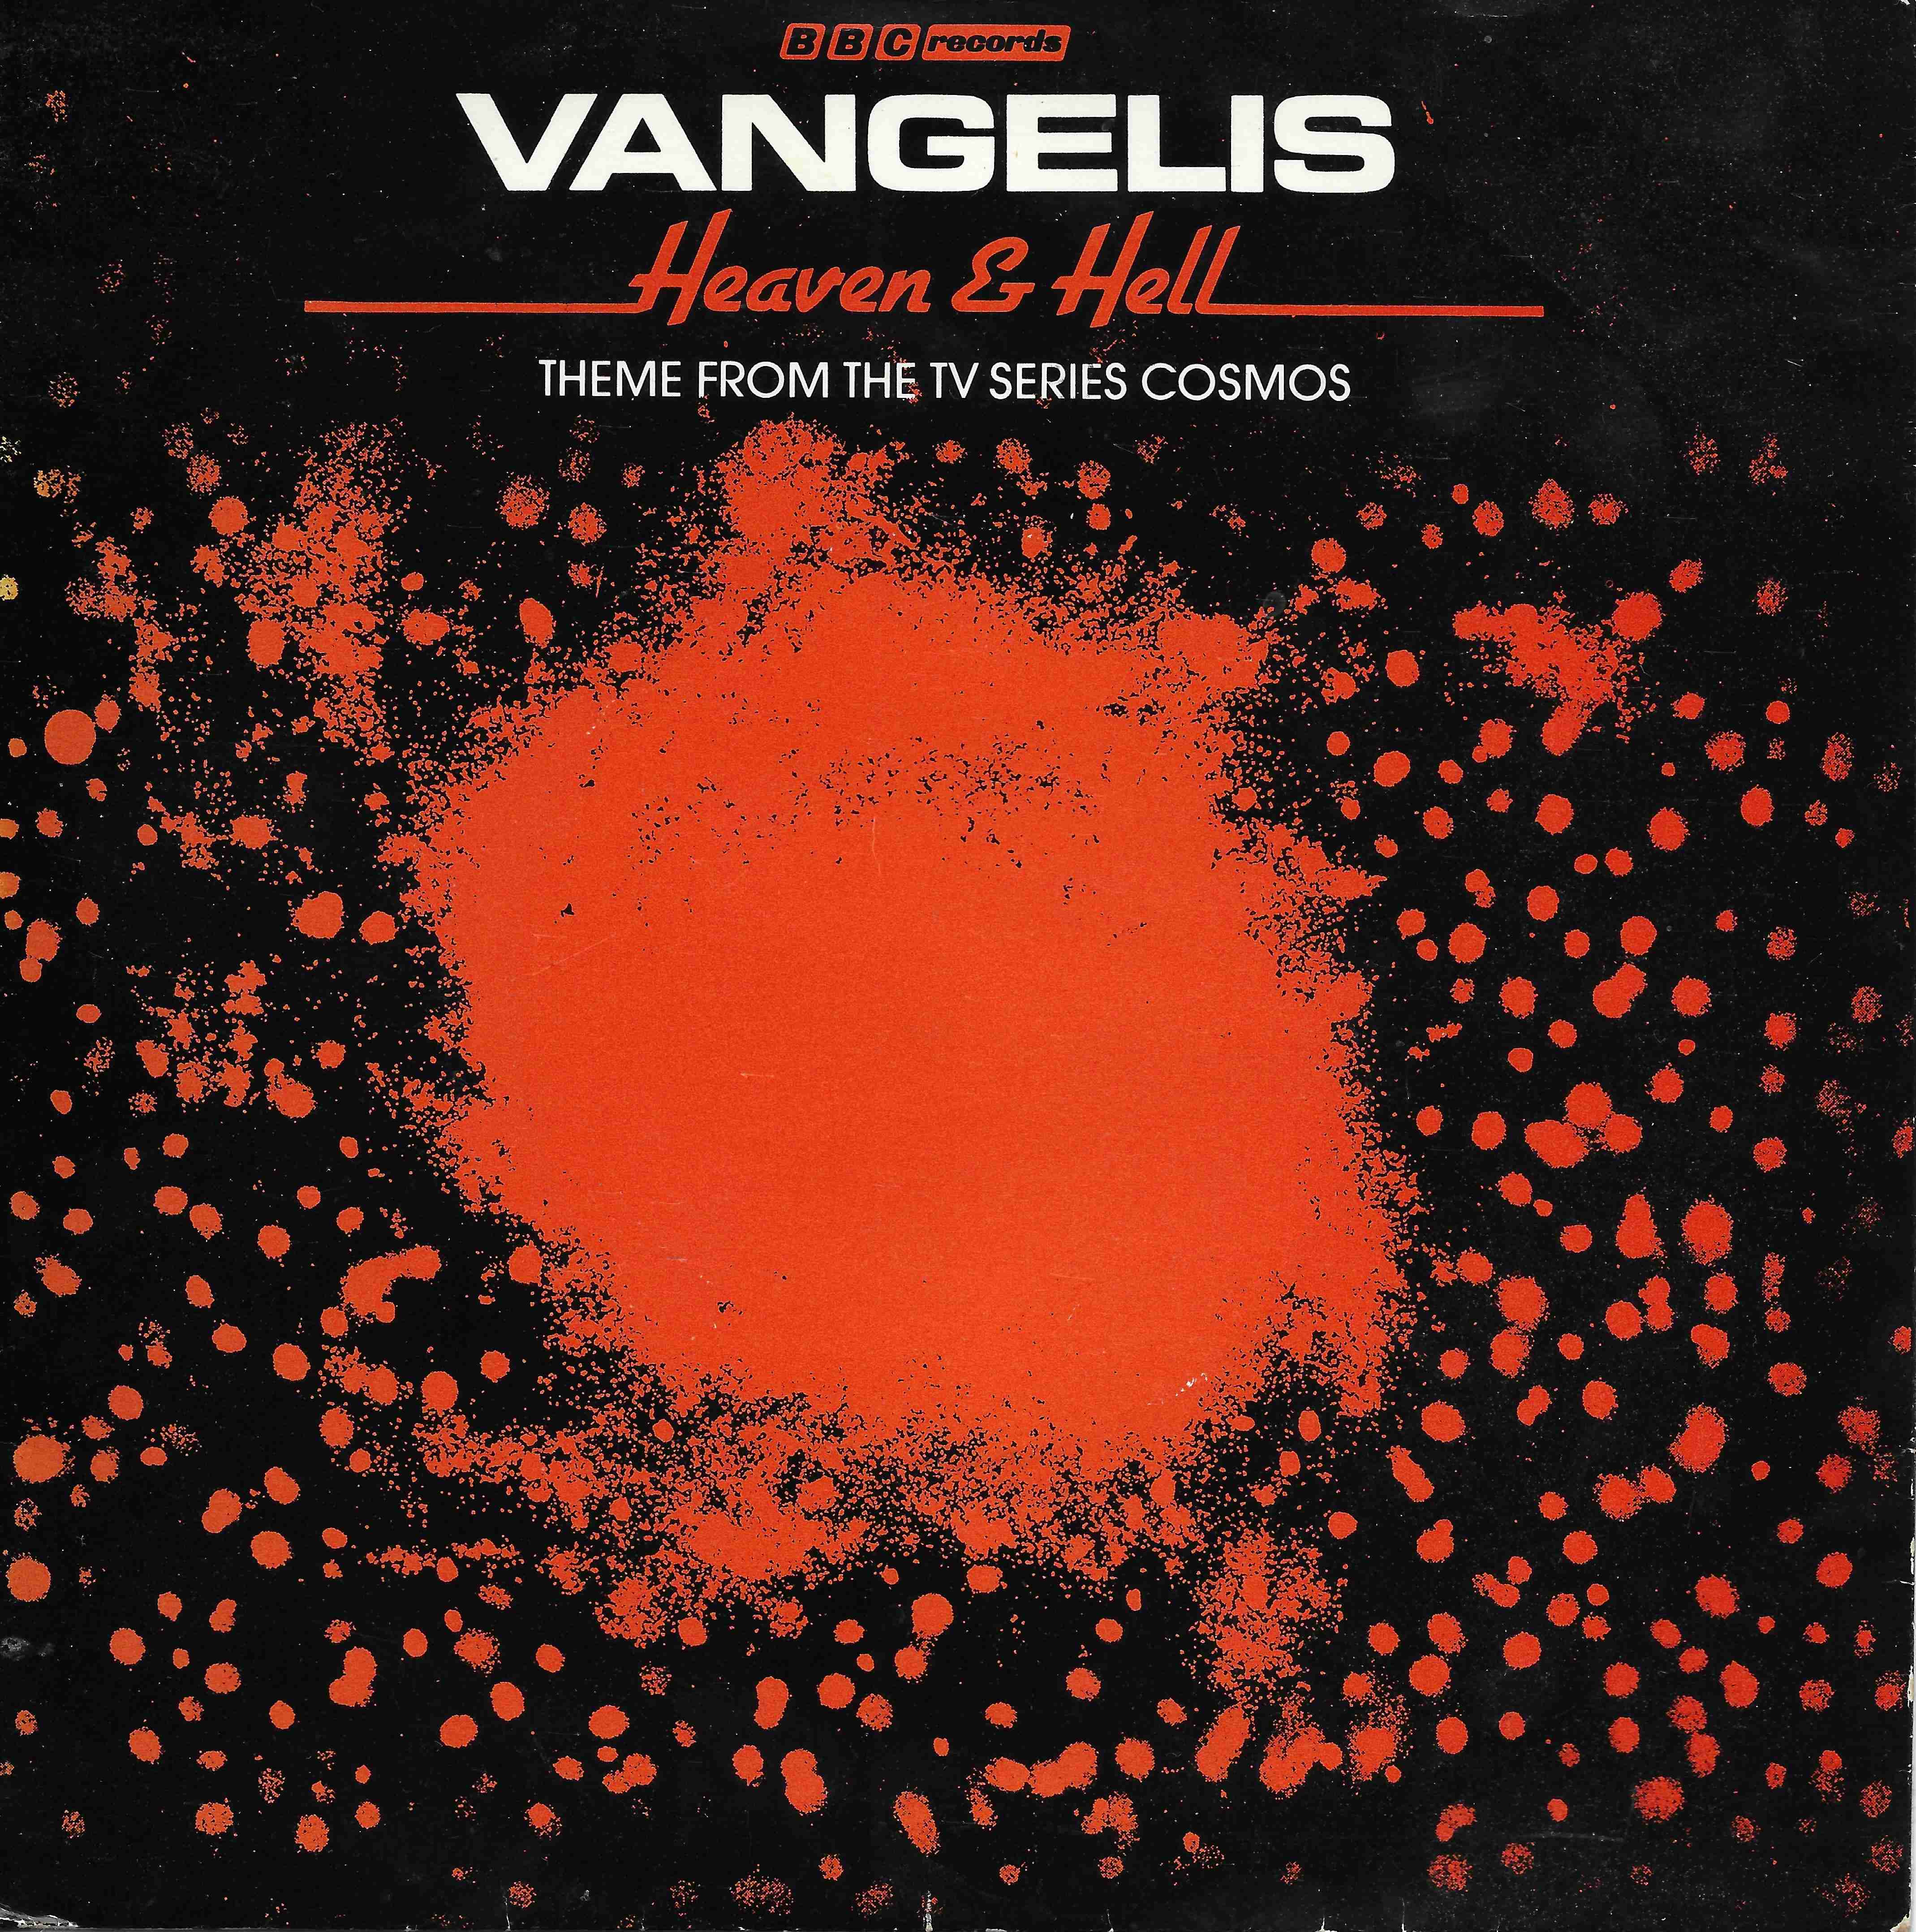 Picture of BBC 1 Heaven & Hell (Cosmos) by artist Vangelis from the BBC records and Tapes library